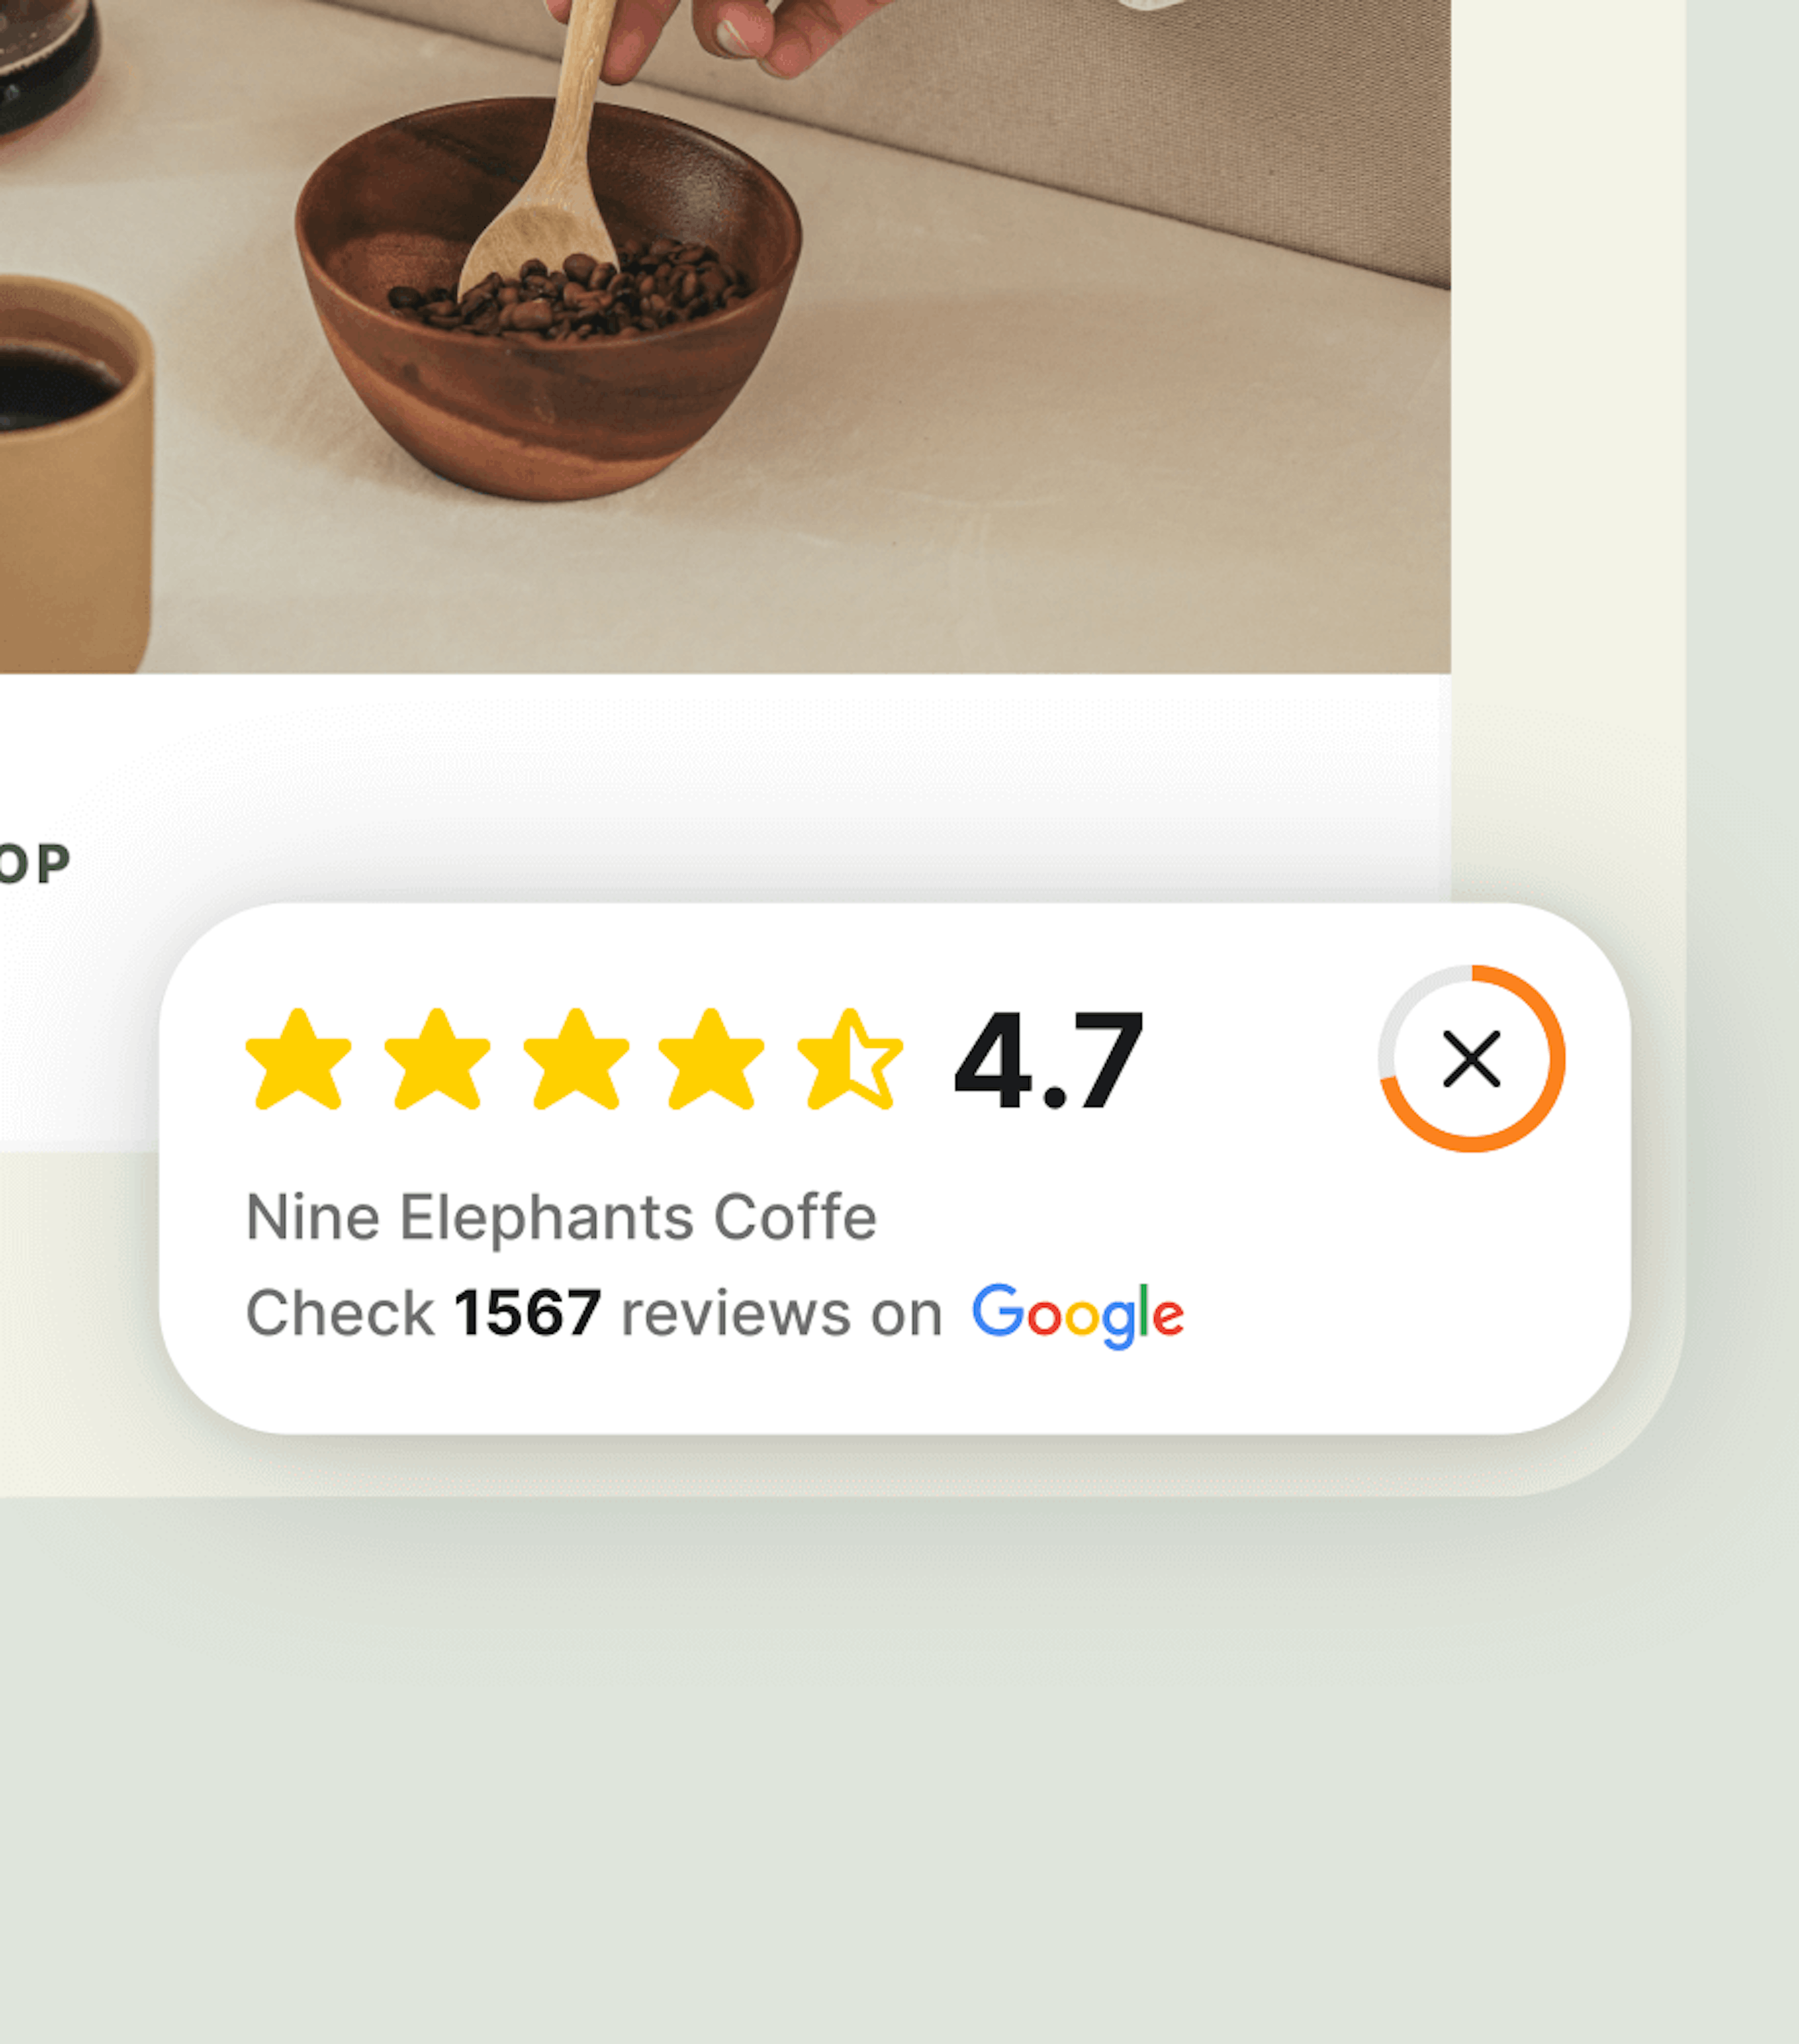 Showcase Your Online Reputation and Increase Sales With Our Free Google Reviews Widget